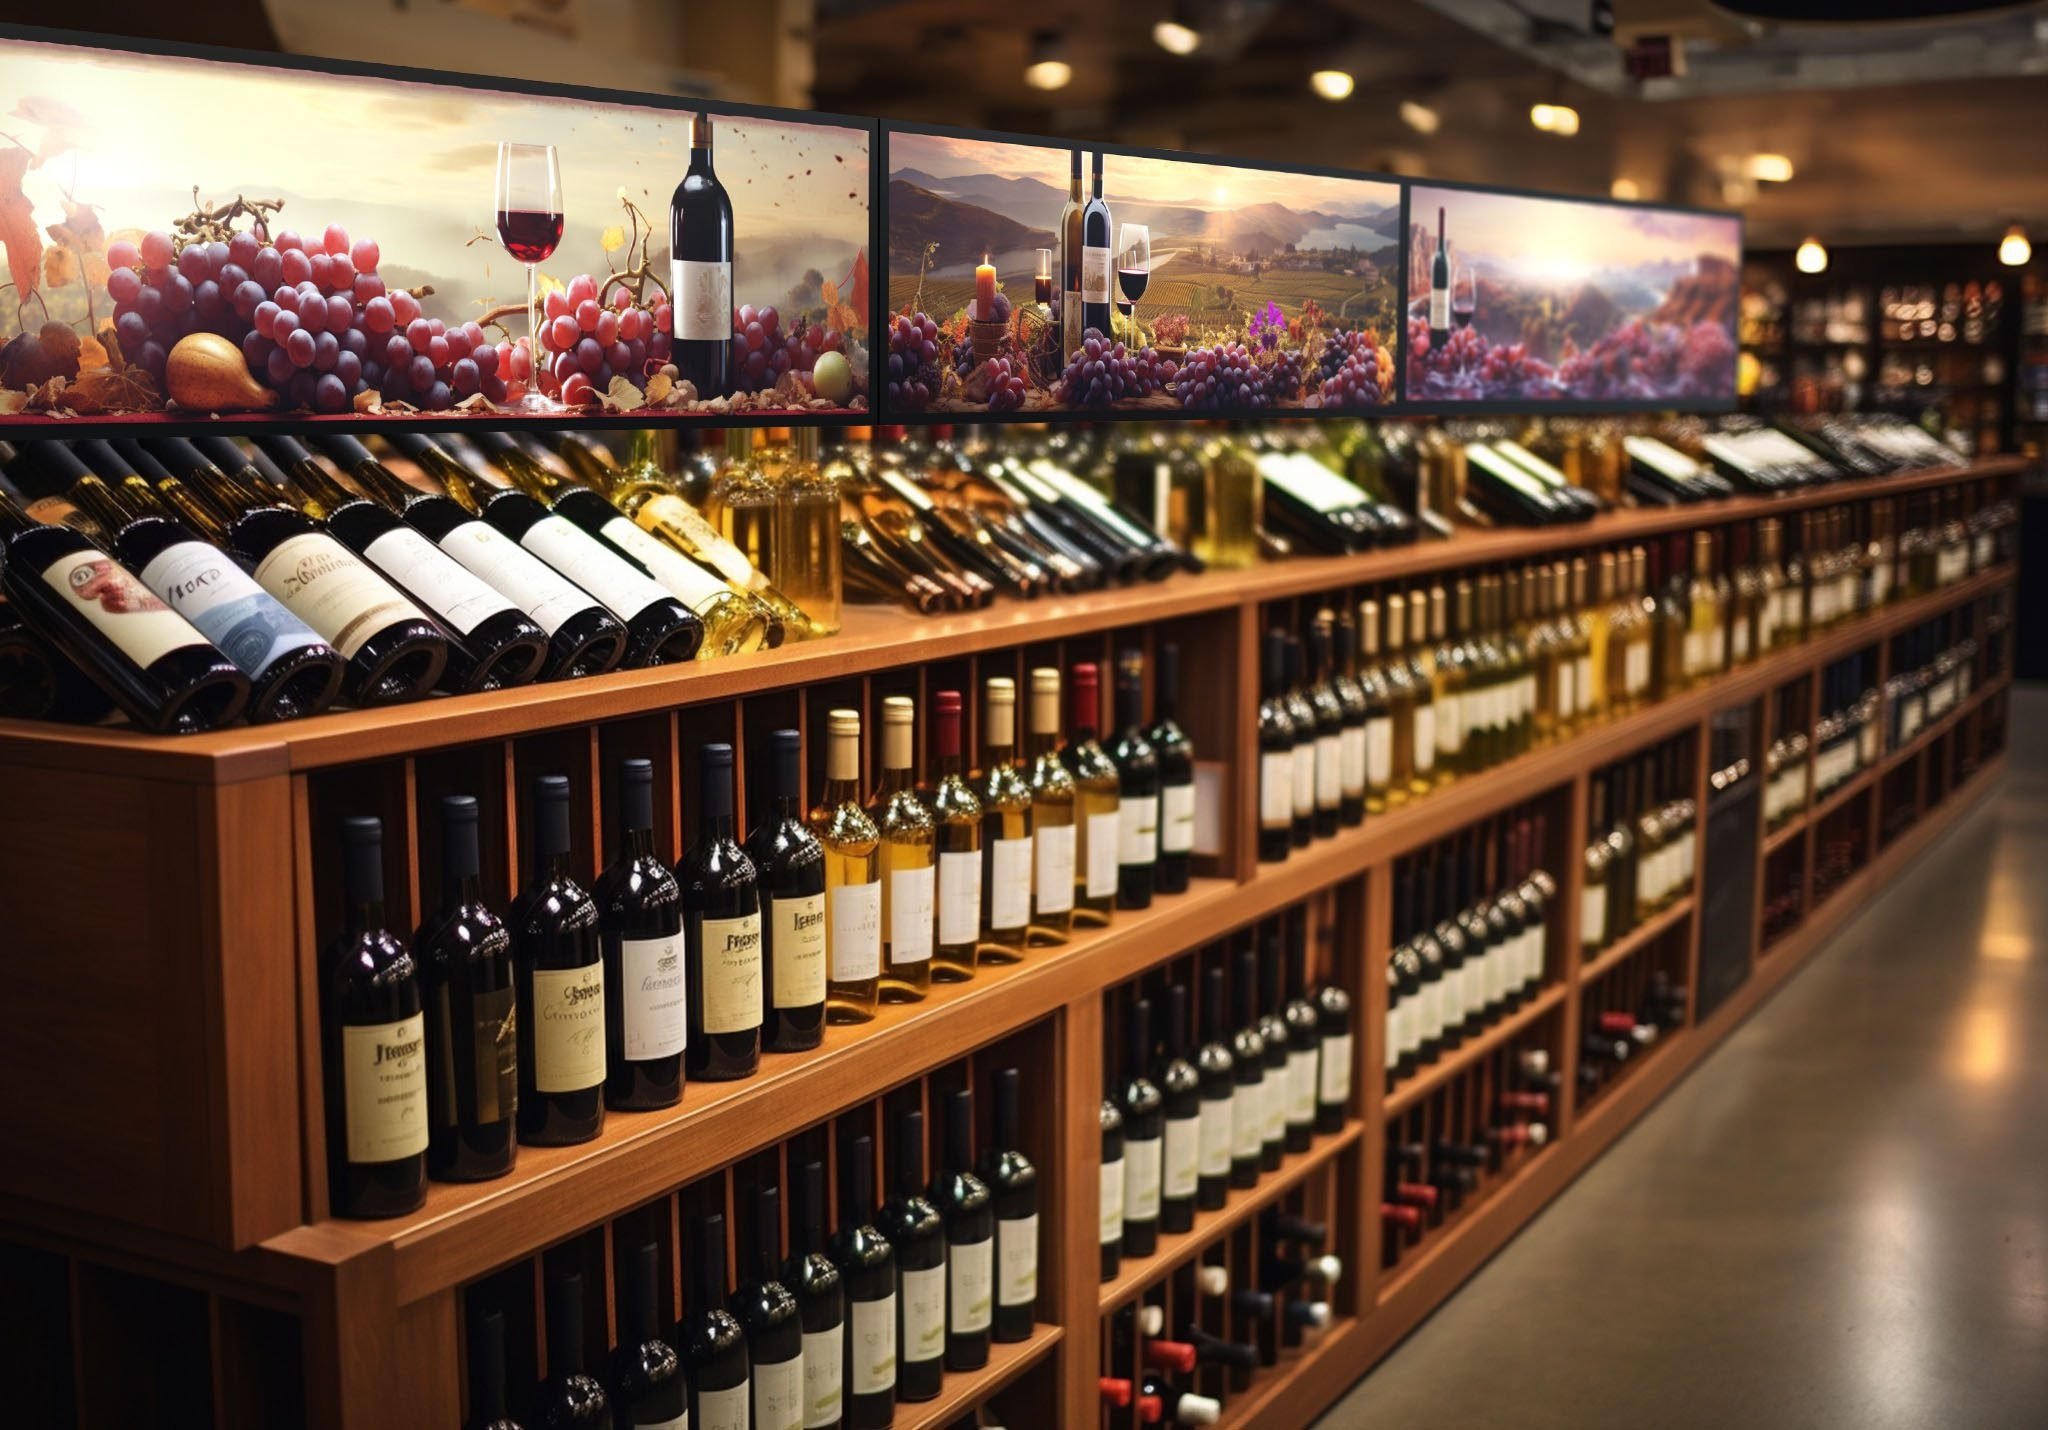 ultra wide stretched digital display for wine display